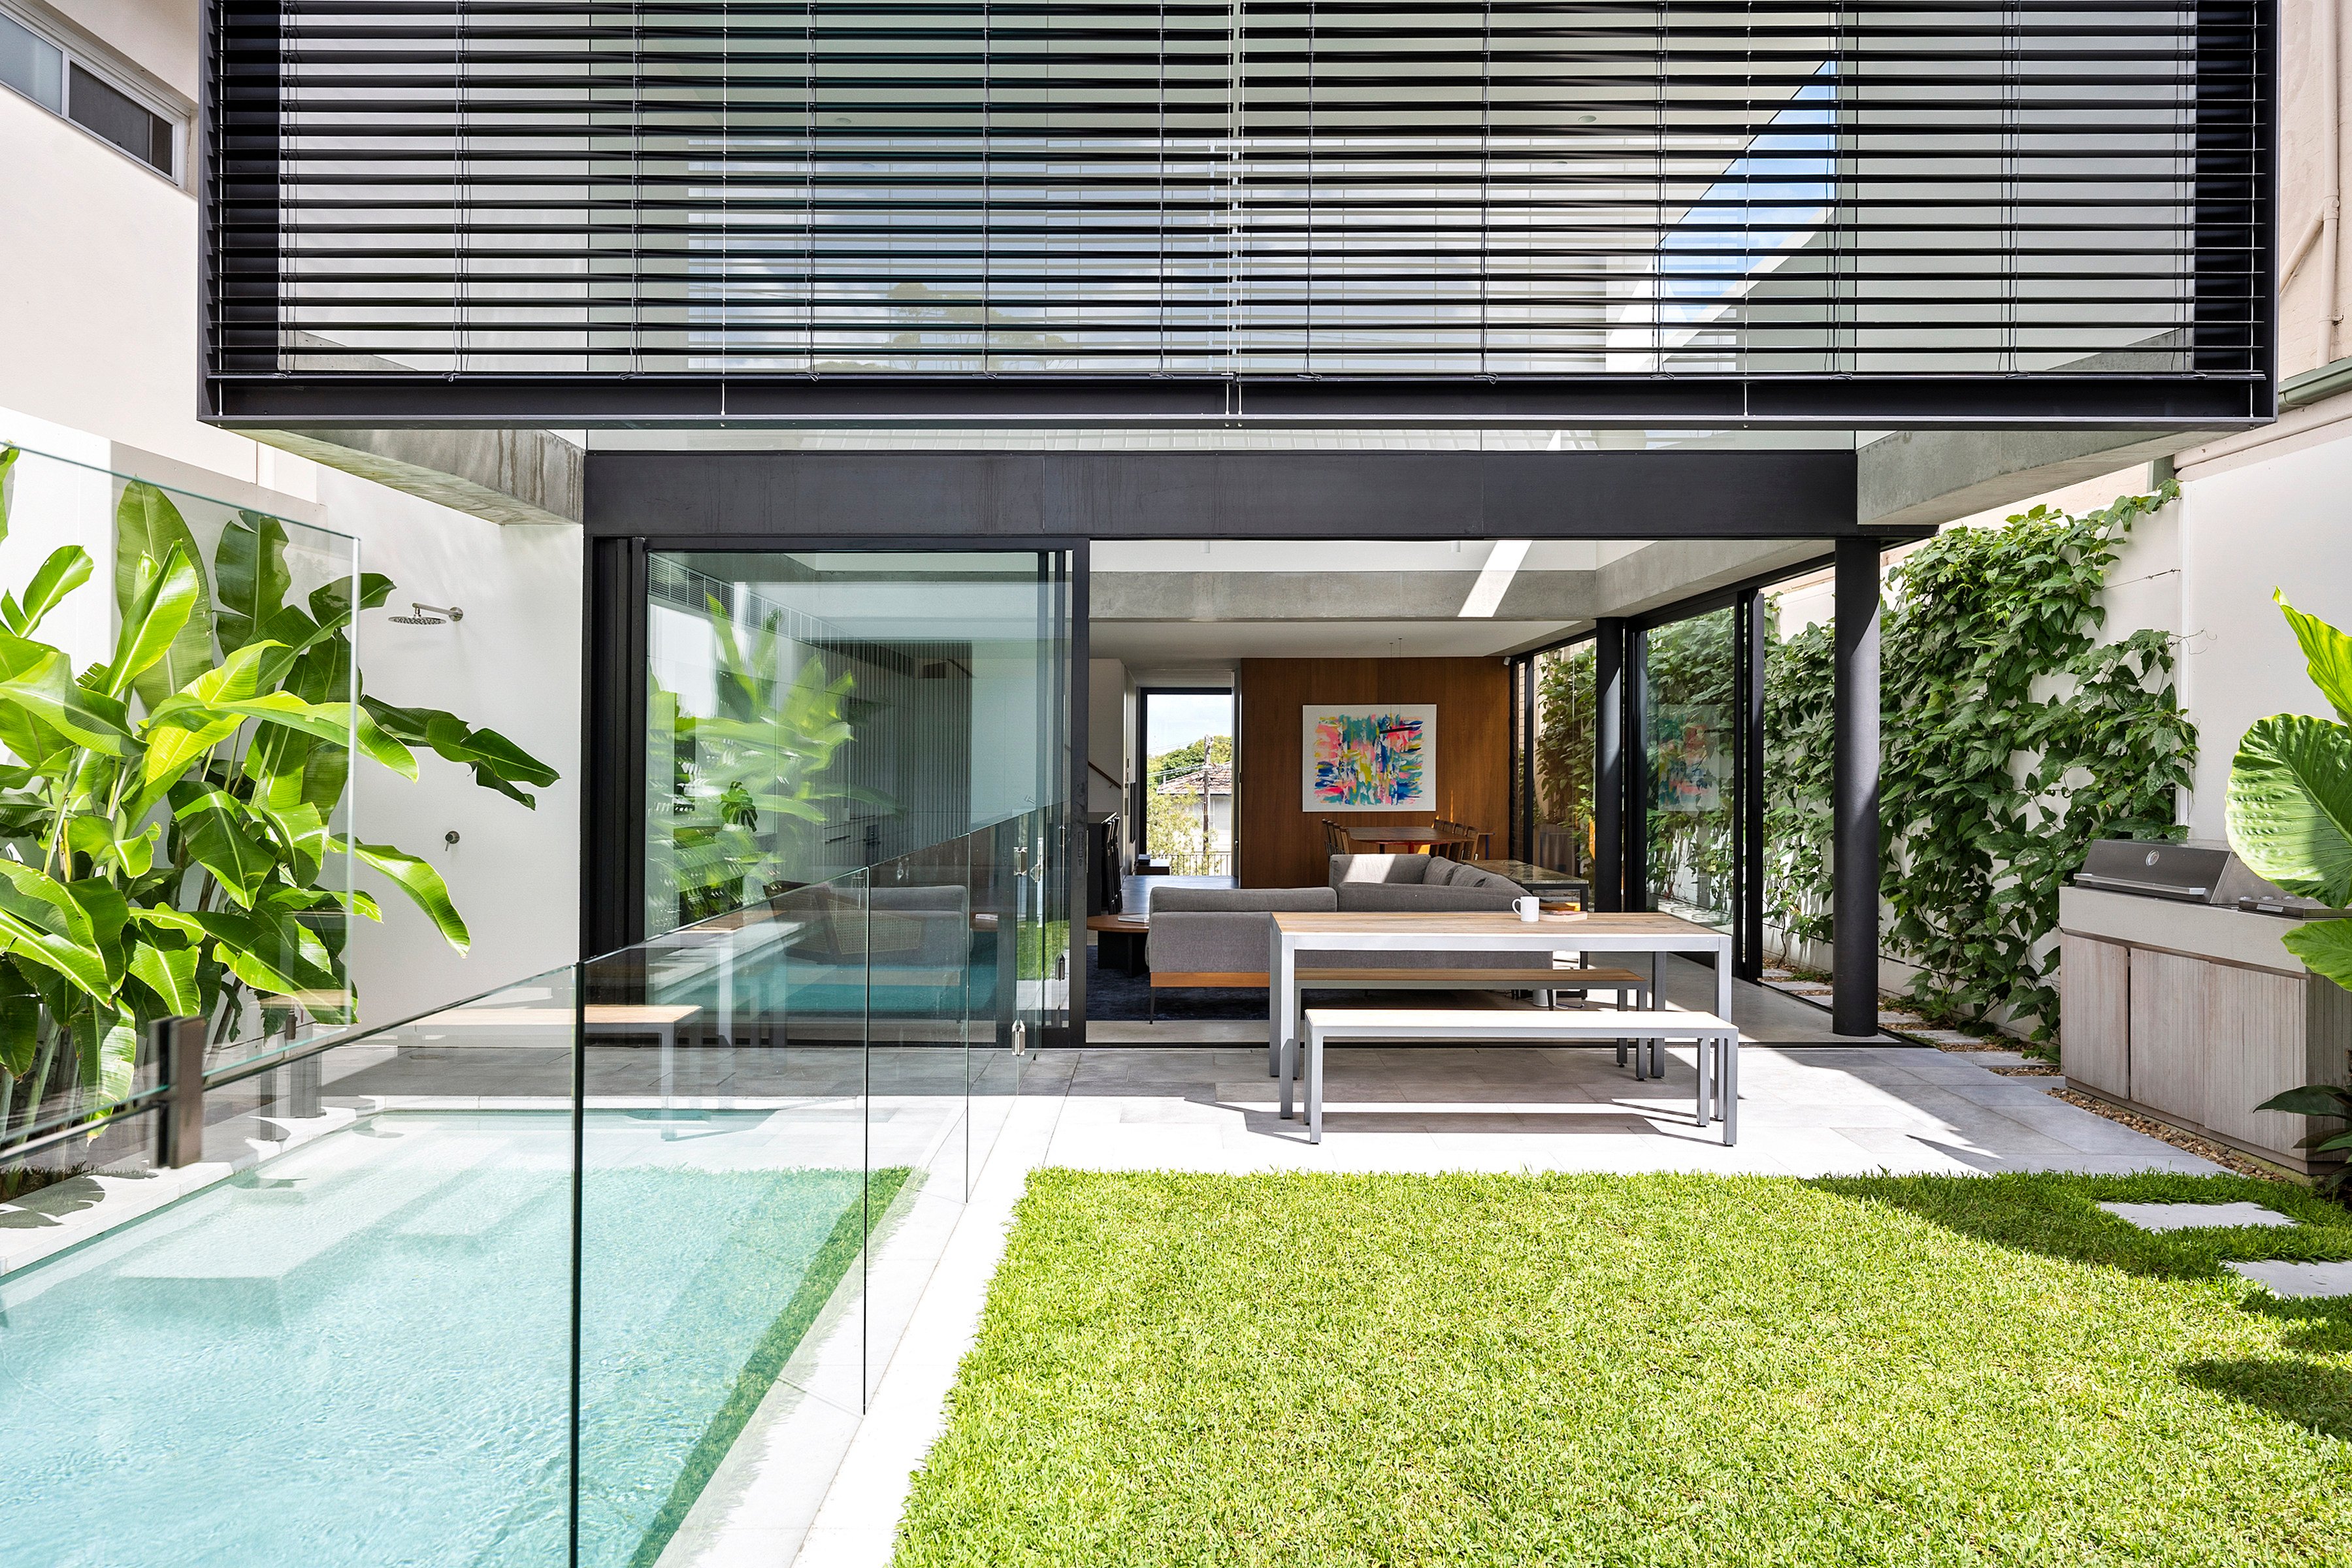 The garden and living room of a family home in Queens Park, Sydney, Australia. The house was designed from the ground up for the Olah family, who relocated from Hong Kong. Photo: Desmond Chan